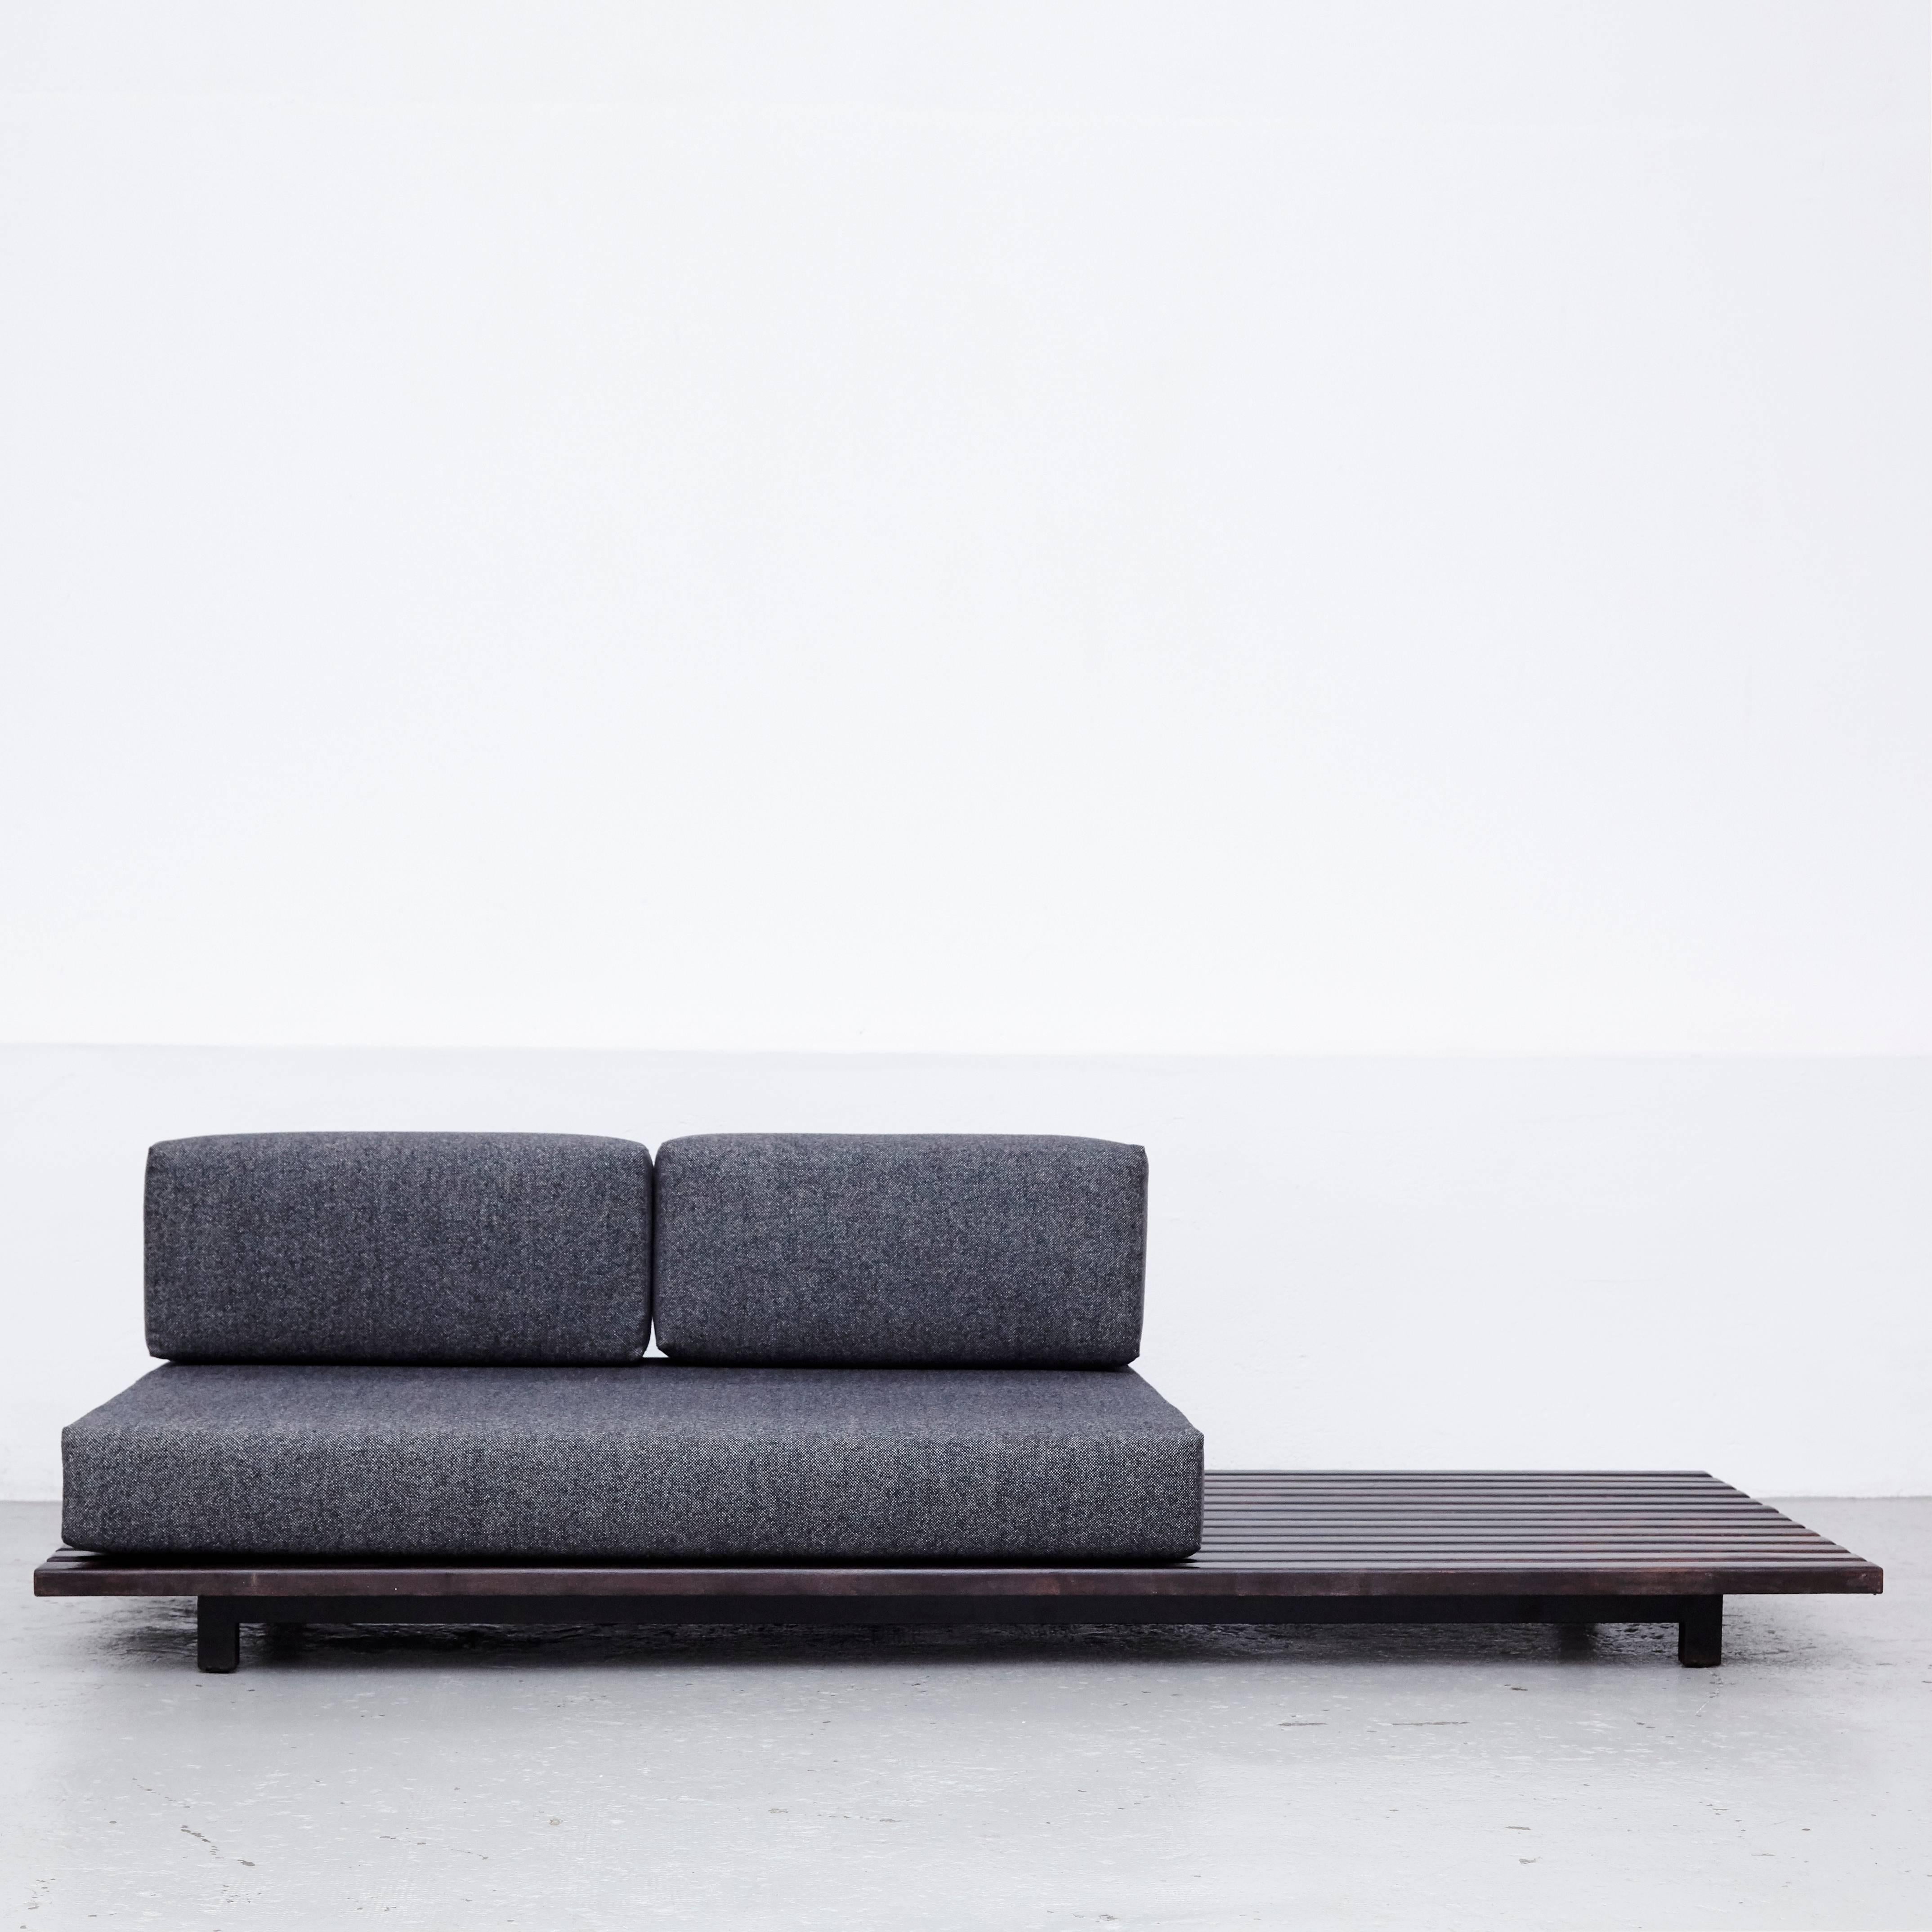 Low bench designed by Charlotte Perriand, circa 1950.
Manufactured by Steph Simon (France) circa 1950.
Wood, lacquered metal frame and legs.

The cushions has been produced now according to the original measurements with high quality wool